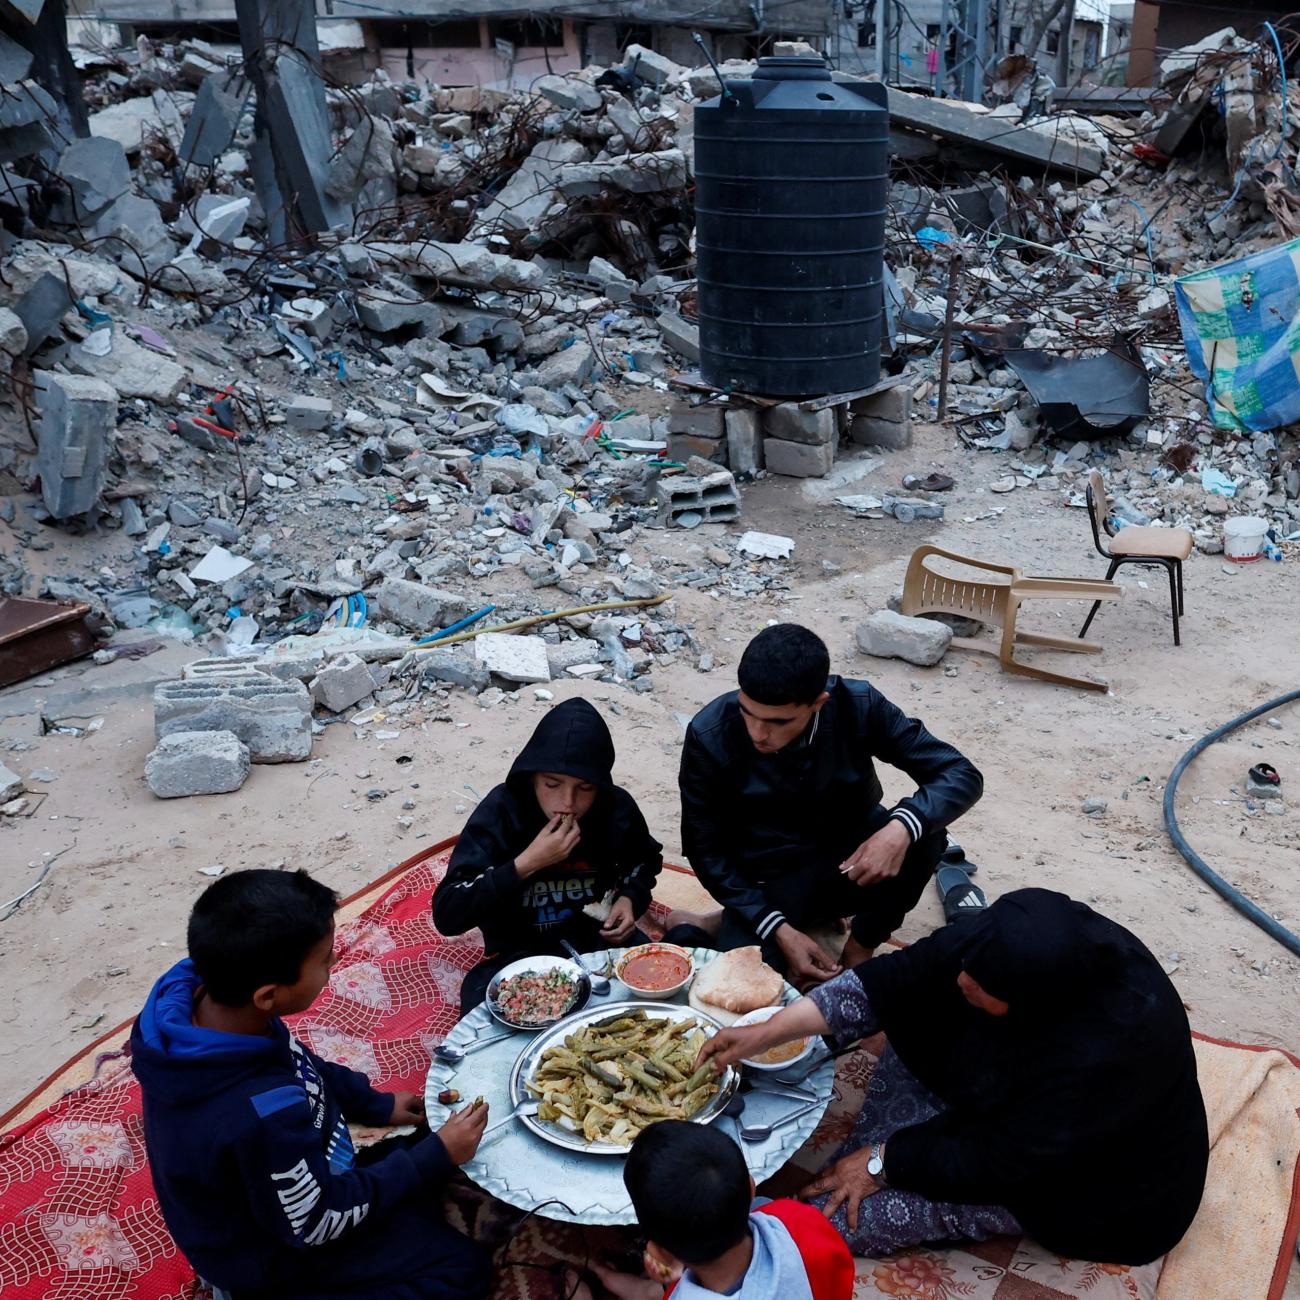 A Palestinian family eats their iftar meal they break their fast near the rubble of their destroyed house.